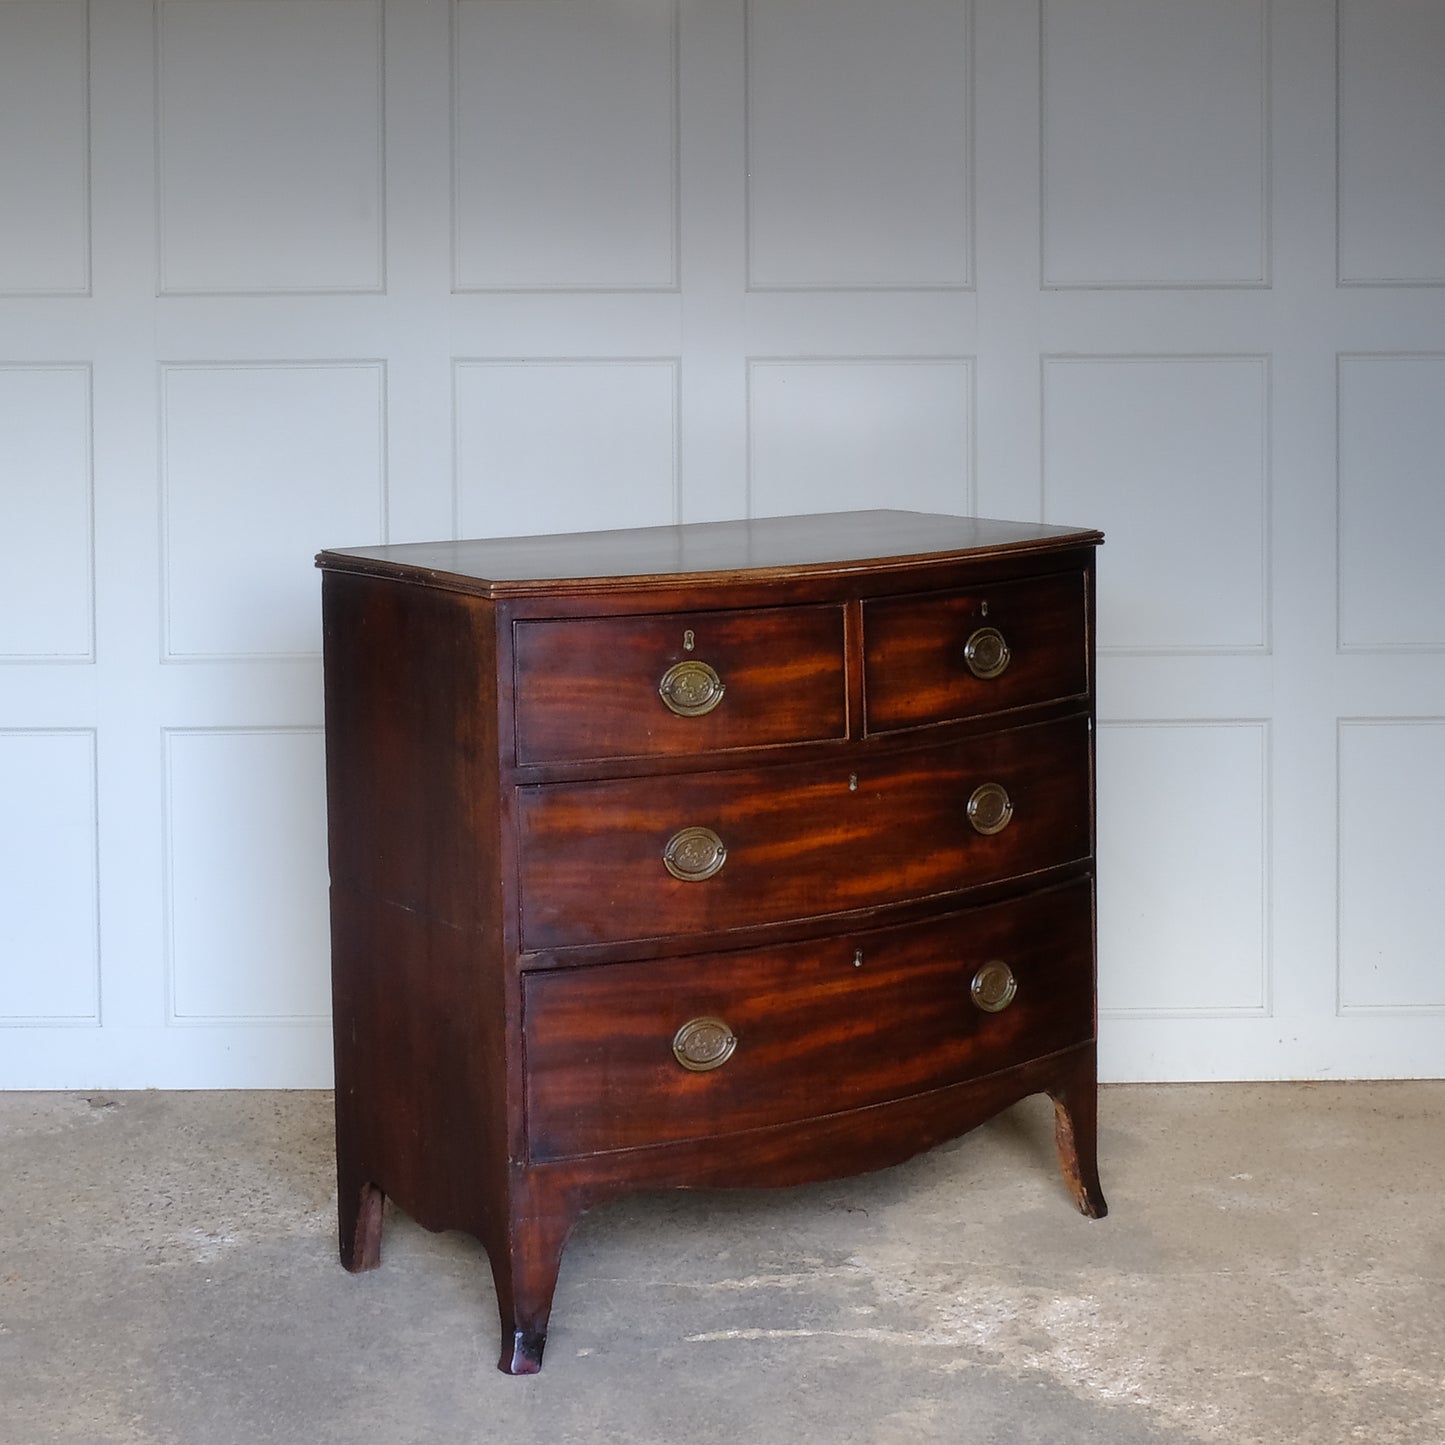 18th century mahogany bow fronted chest of drawers